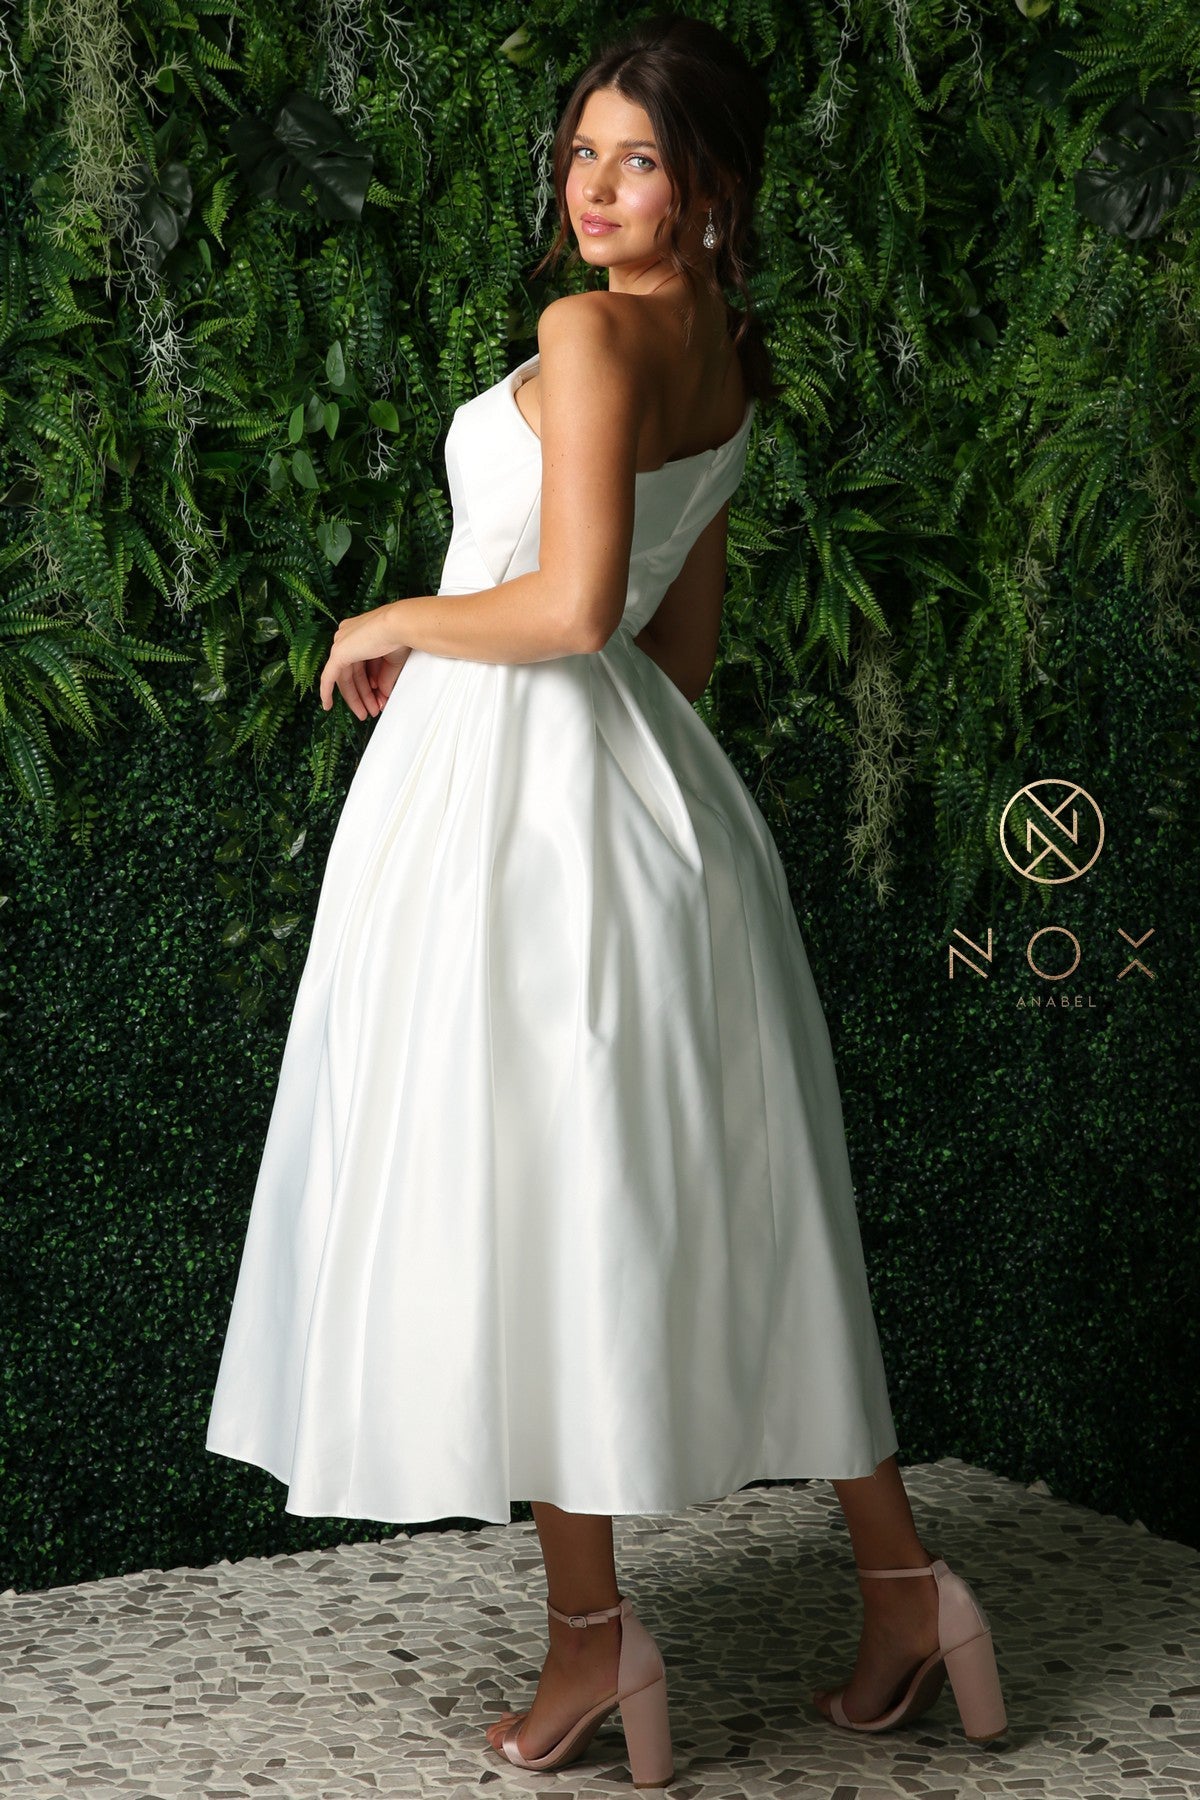 Nox Anabel 931 Short Fitted One Shoulder destination bridal gown. Tea Length Reception Formal Wedding Dress. This Party Gown has Pockets.   Occasions: Cocktail Party, Bridesmaids, Rehearsal Dinner, Prom, Red Carpet, Wedding Guest, Military and Marine Ball, Evening Wear, Formal Gown, Girls' Night Out